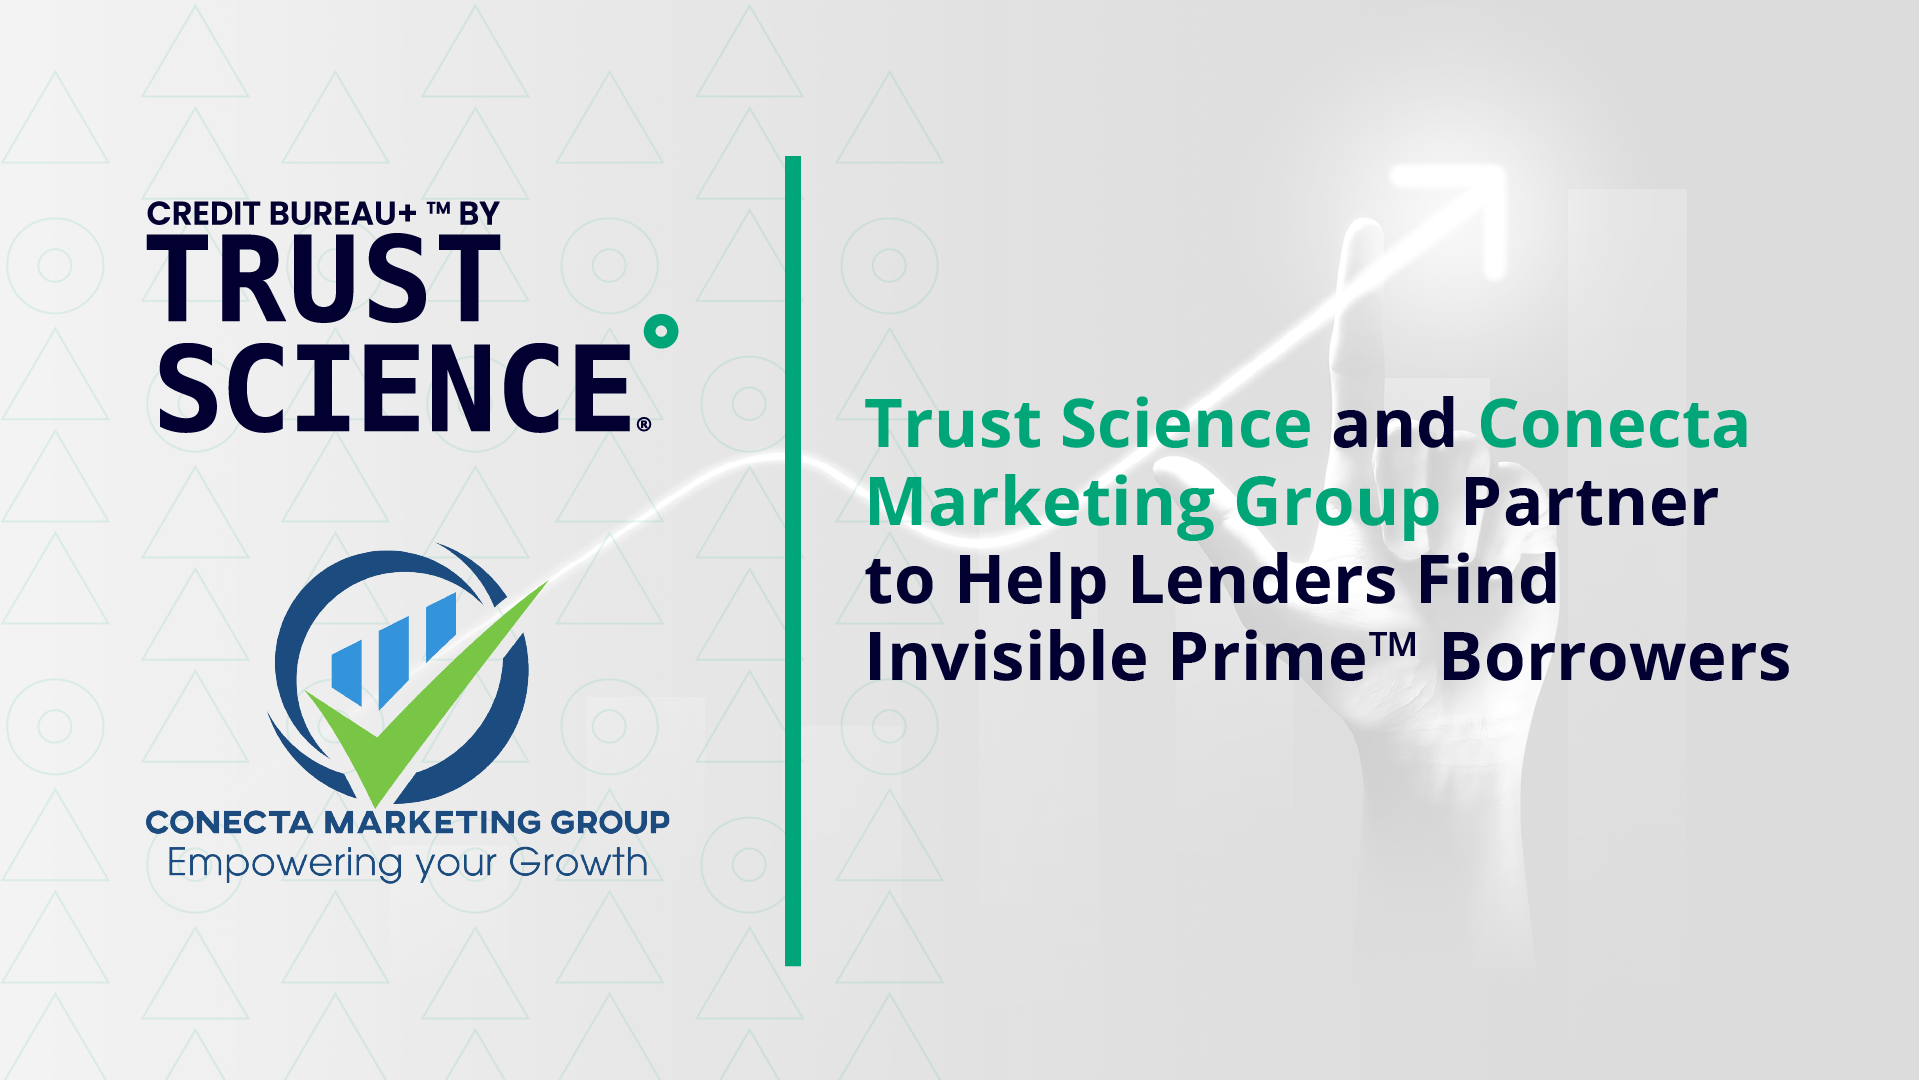 Trust Science and Conecta Marketing Group Partner to Help Lenders Find Invisible Prime™ Prospects